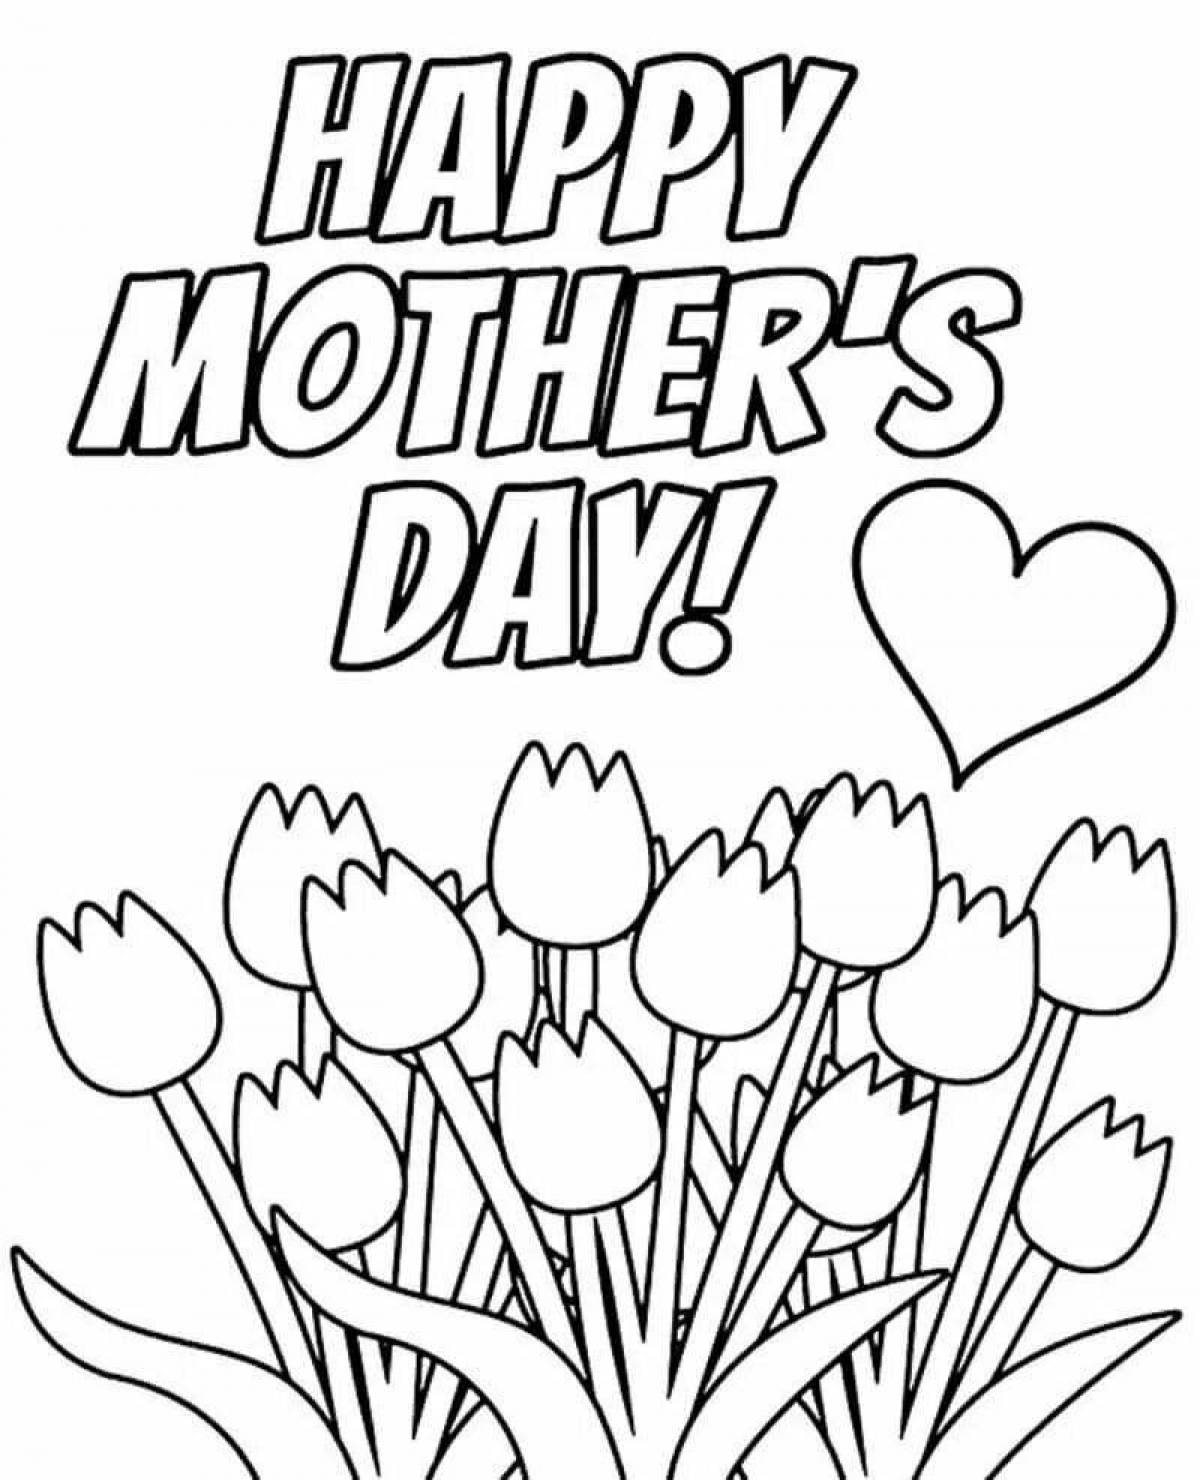 Gorgeous Mother's Day card coloring page